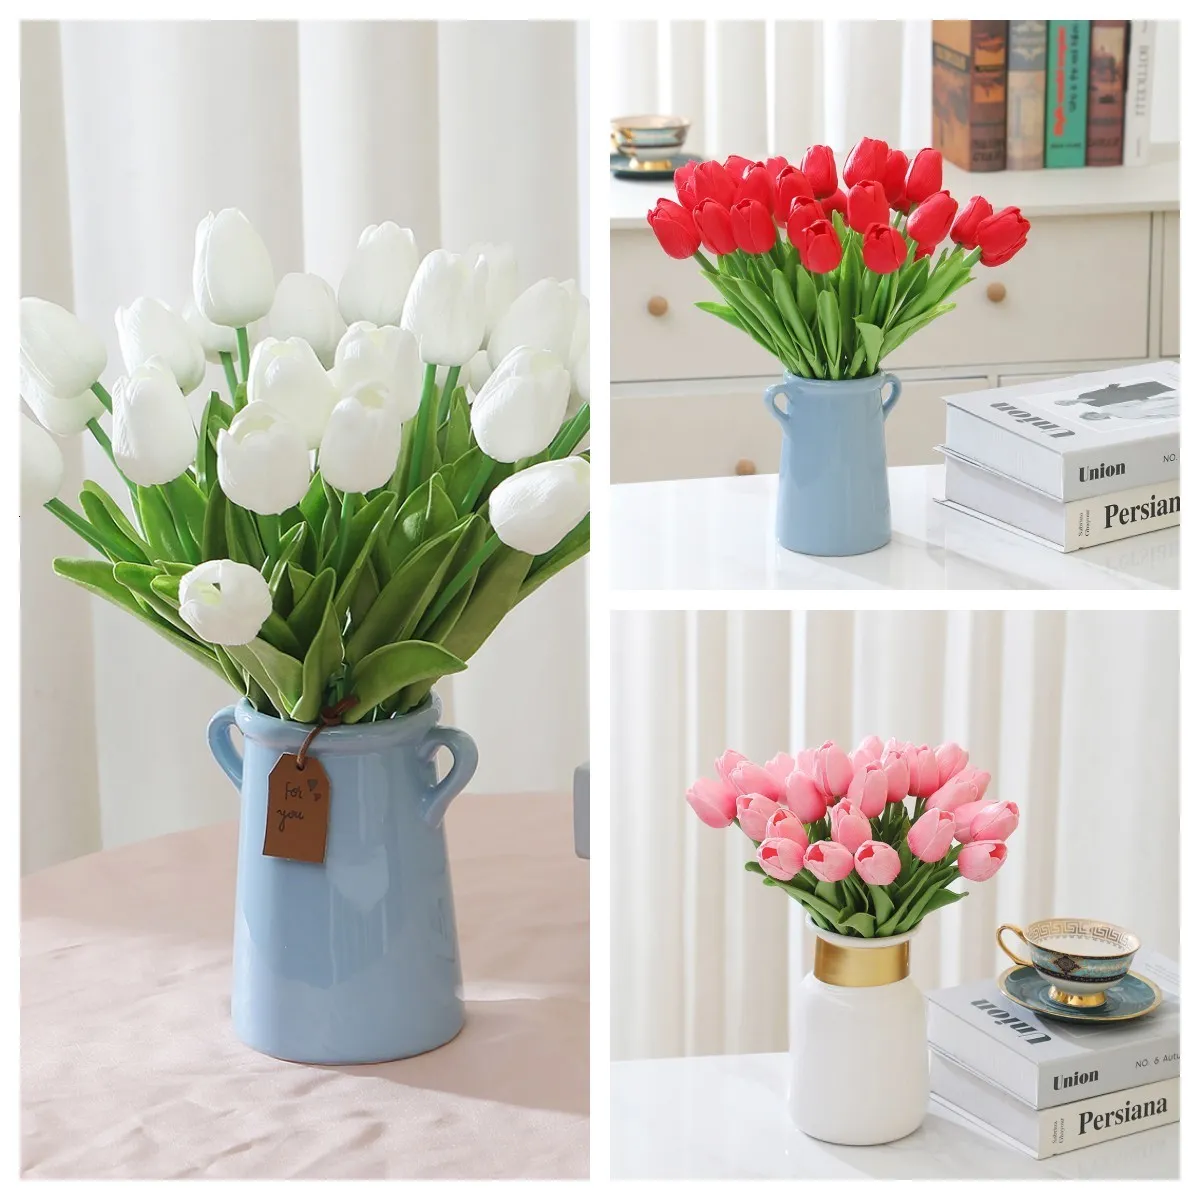 Decorative Flowers Wreaths 10pcs Tulips Artificial Flowers Real Touch Tulip Faux Fake Tulips Flower Bouquet for DIY Party Wedding Decor Flower Home Decor 230828